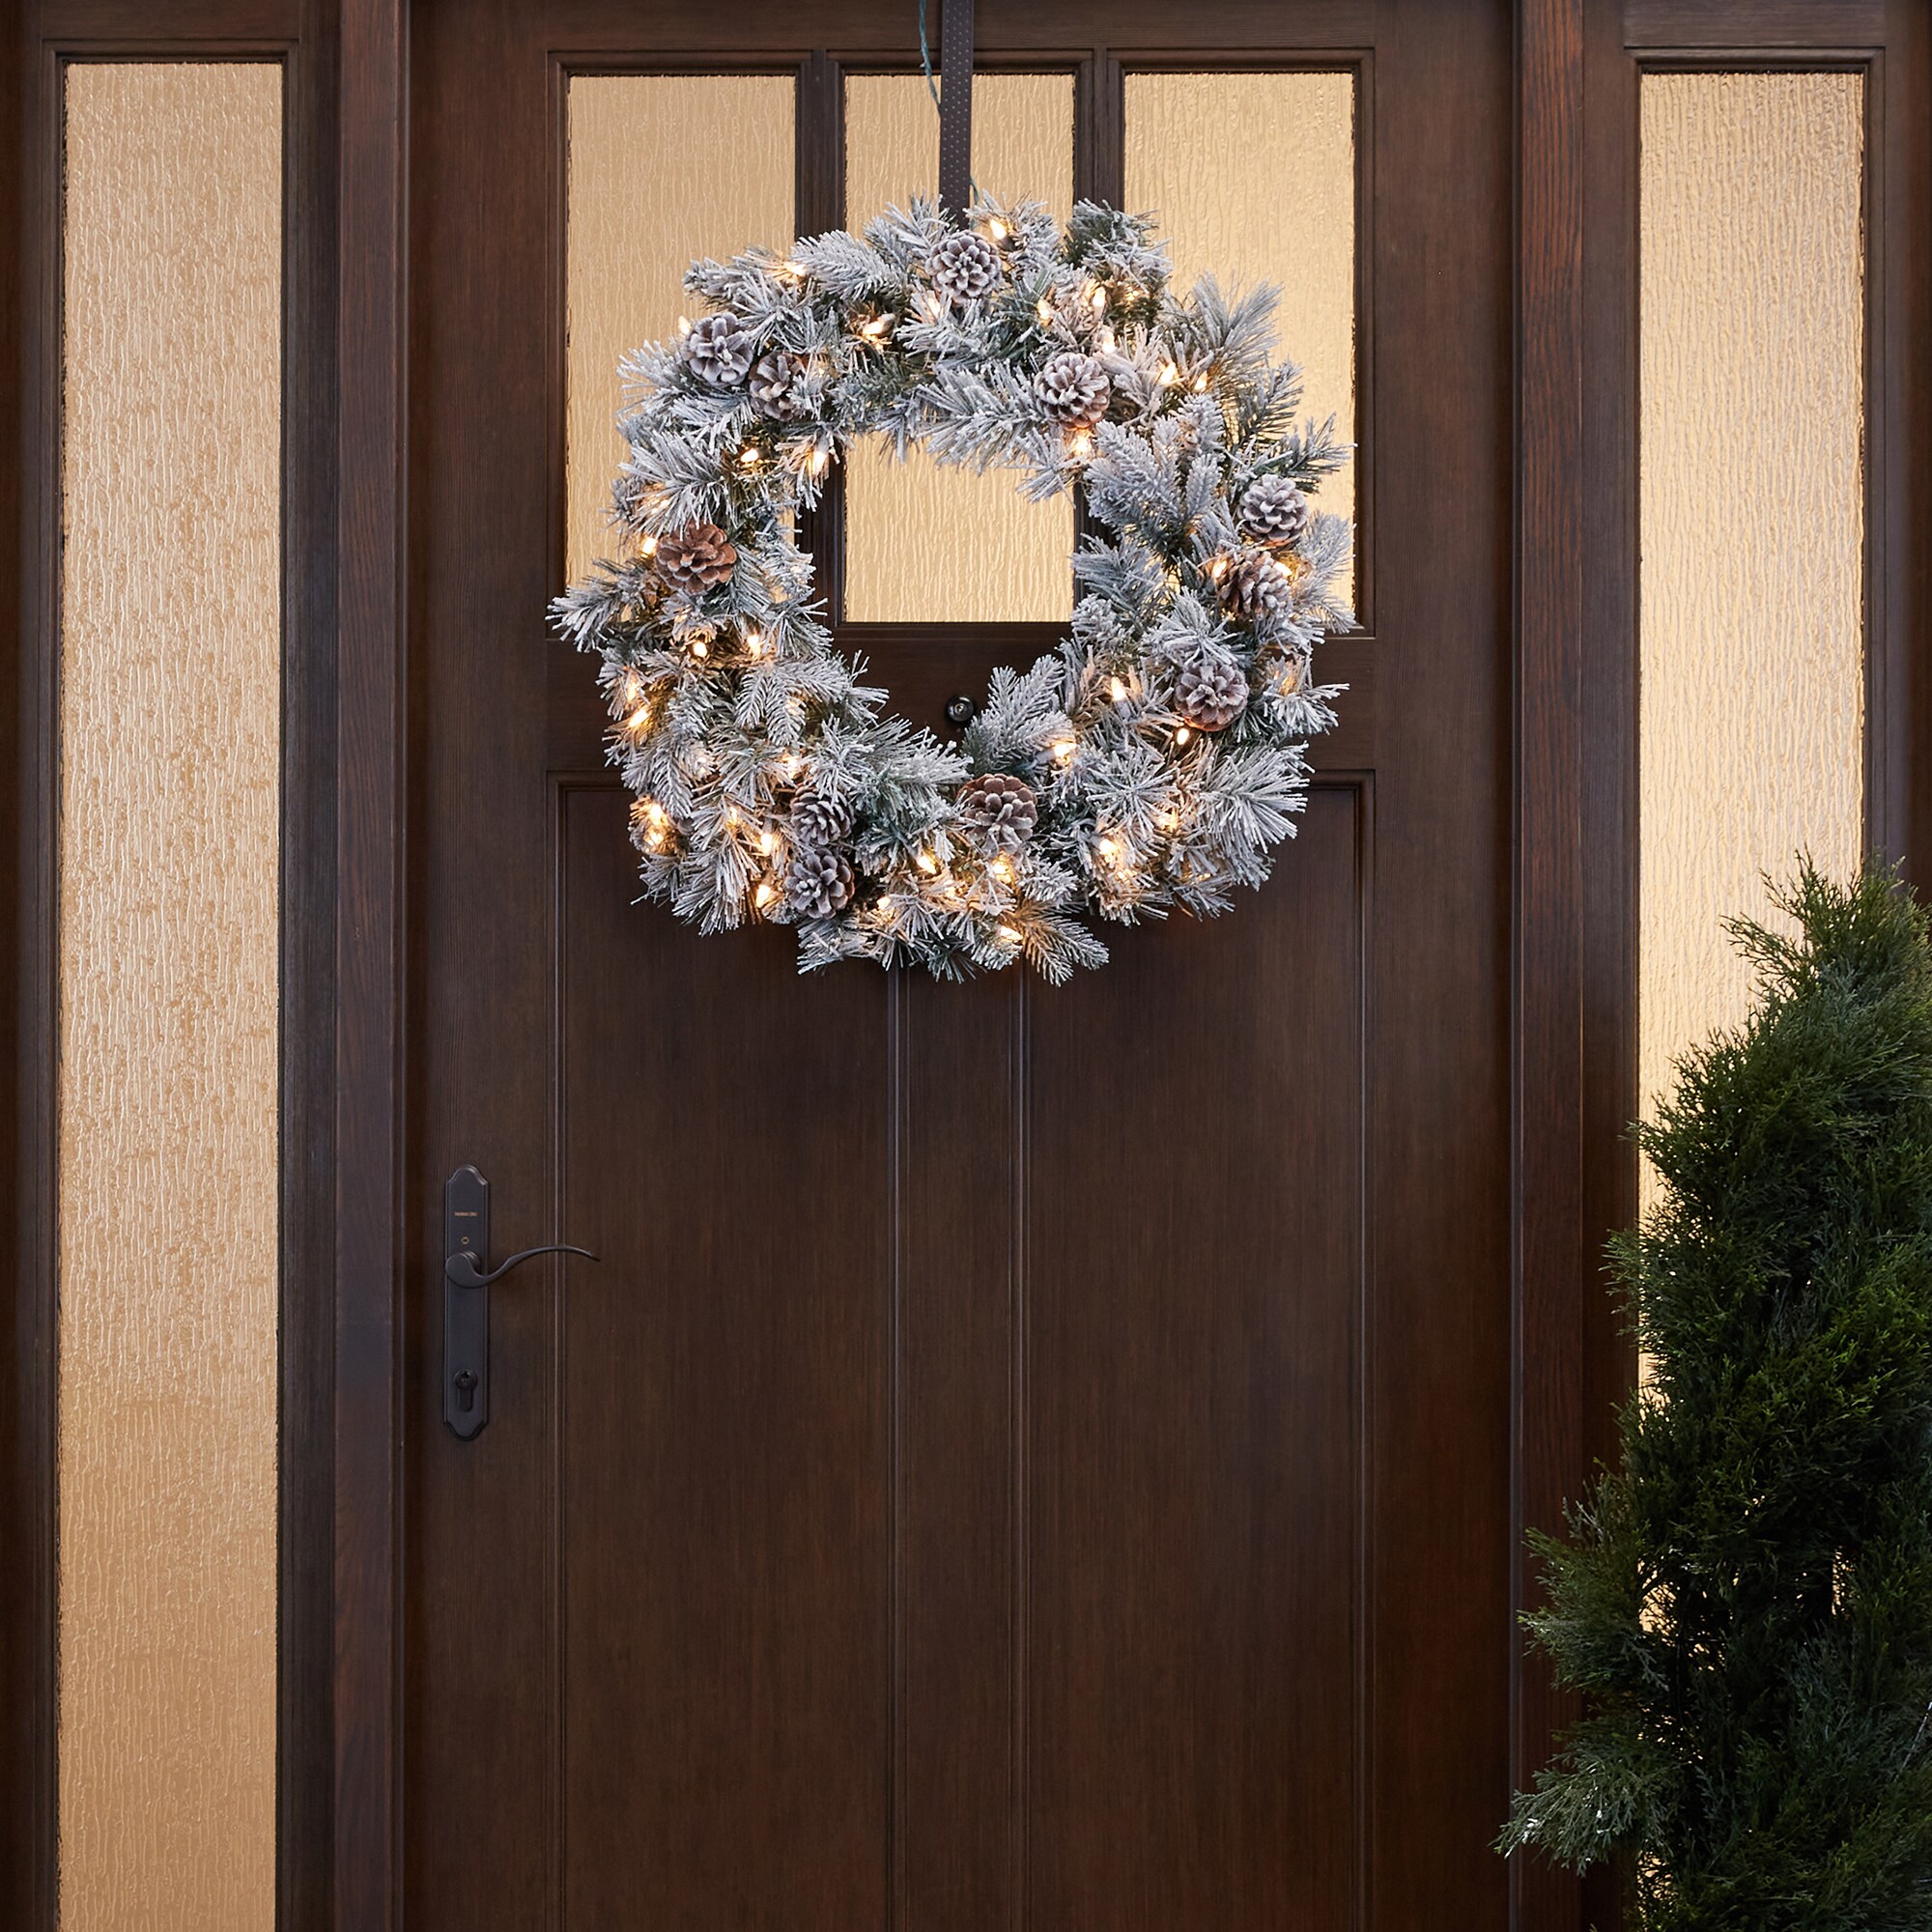 Details about   PRE-LIT 26-IN BASIC FLOCKED PINE ARTIFICIAL WREATH WITH 50 WARM WHITE LIGHTS 